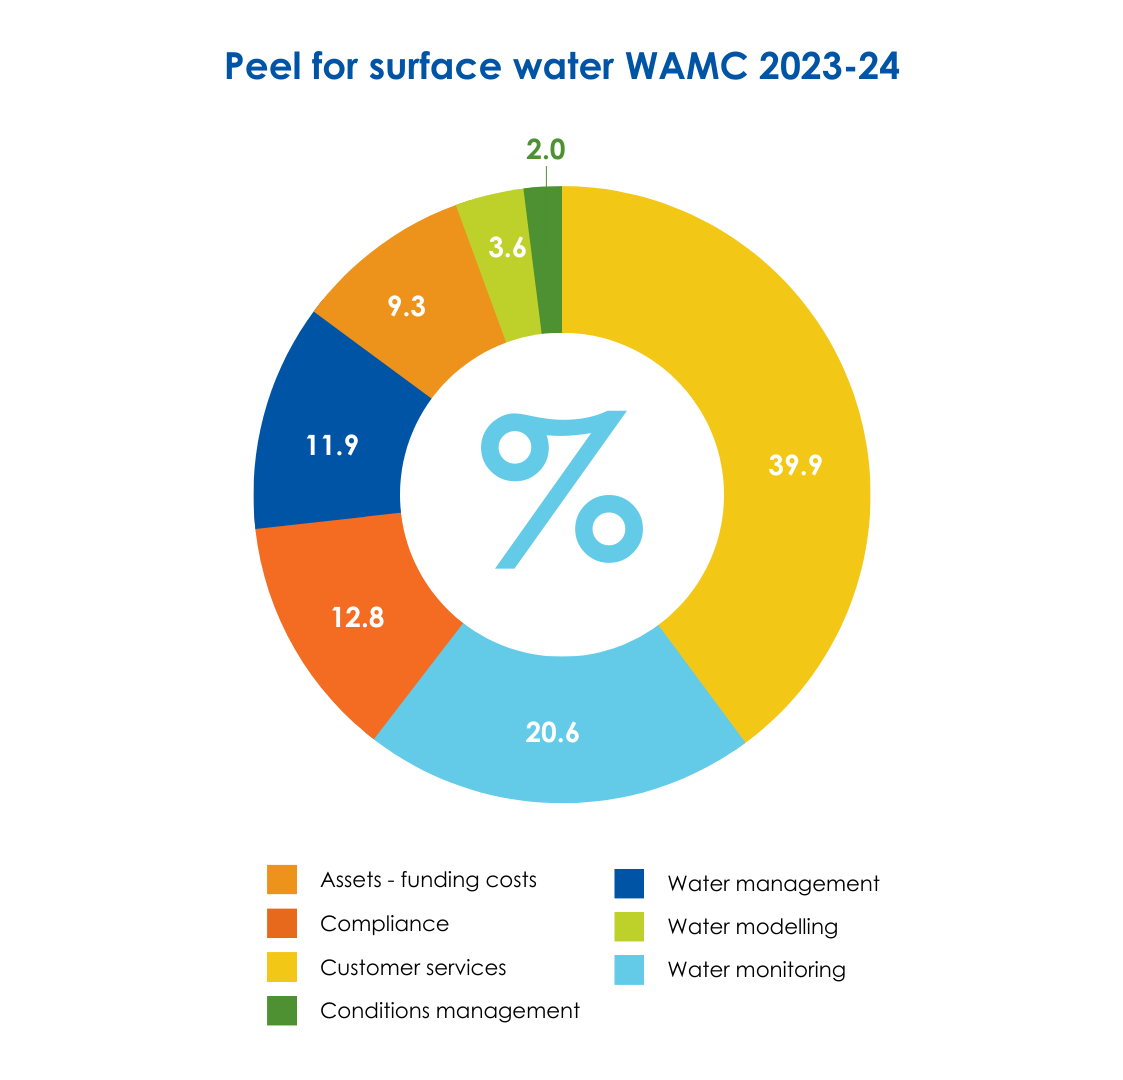 Peel for surface water WAMC 2023-24